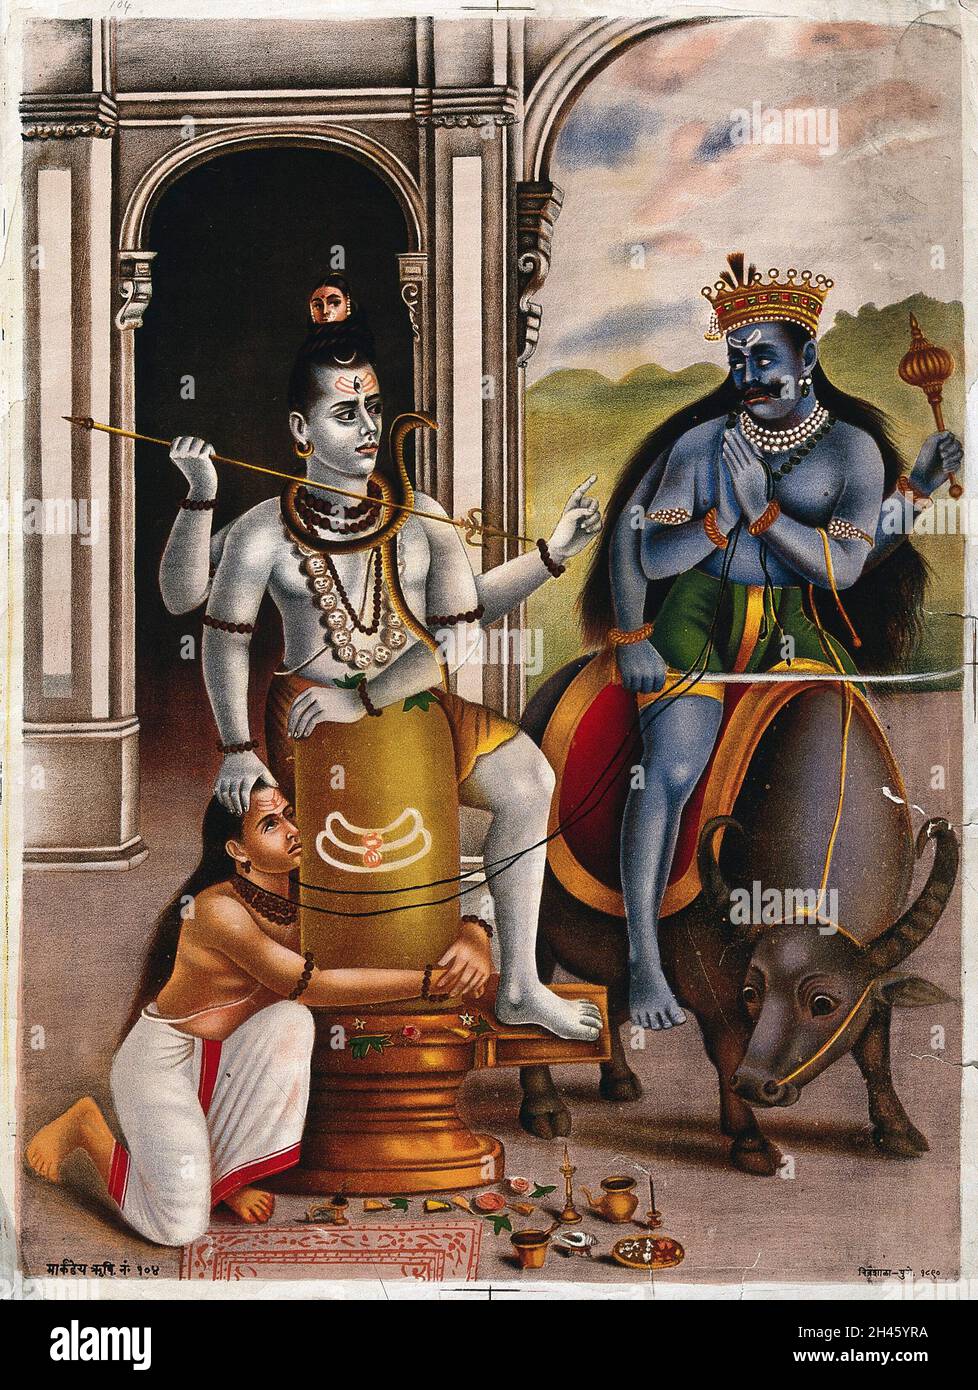 Shiva standing on a lingum, protects a kneeling woman from a demon. Chromolithograph by an Indian artist, 1800s. Stock Photo